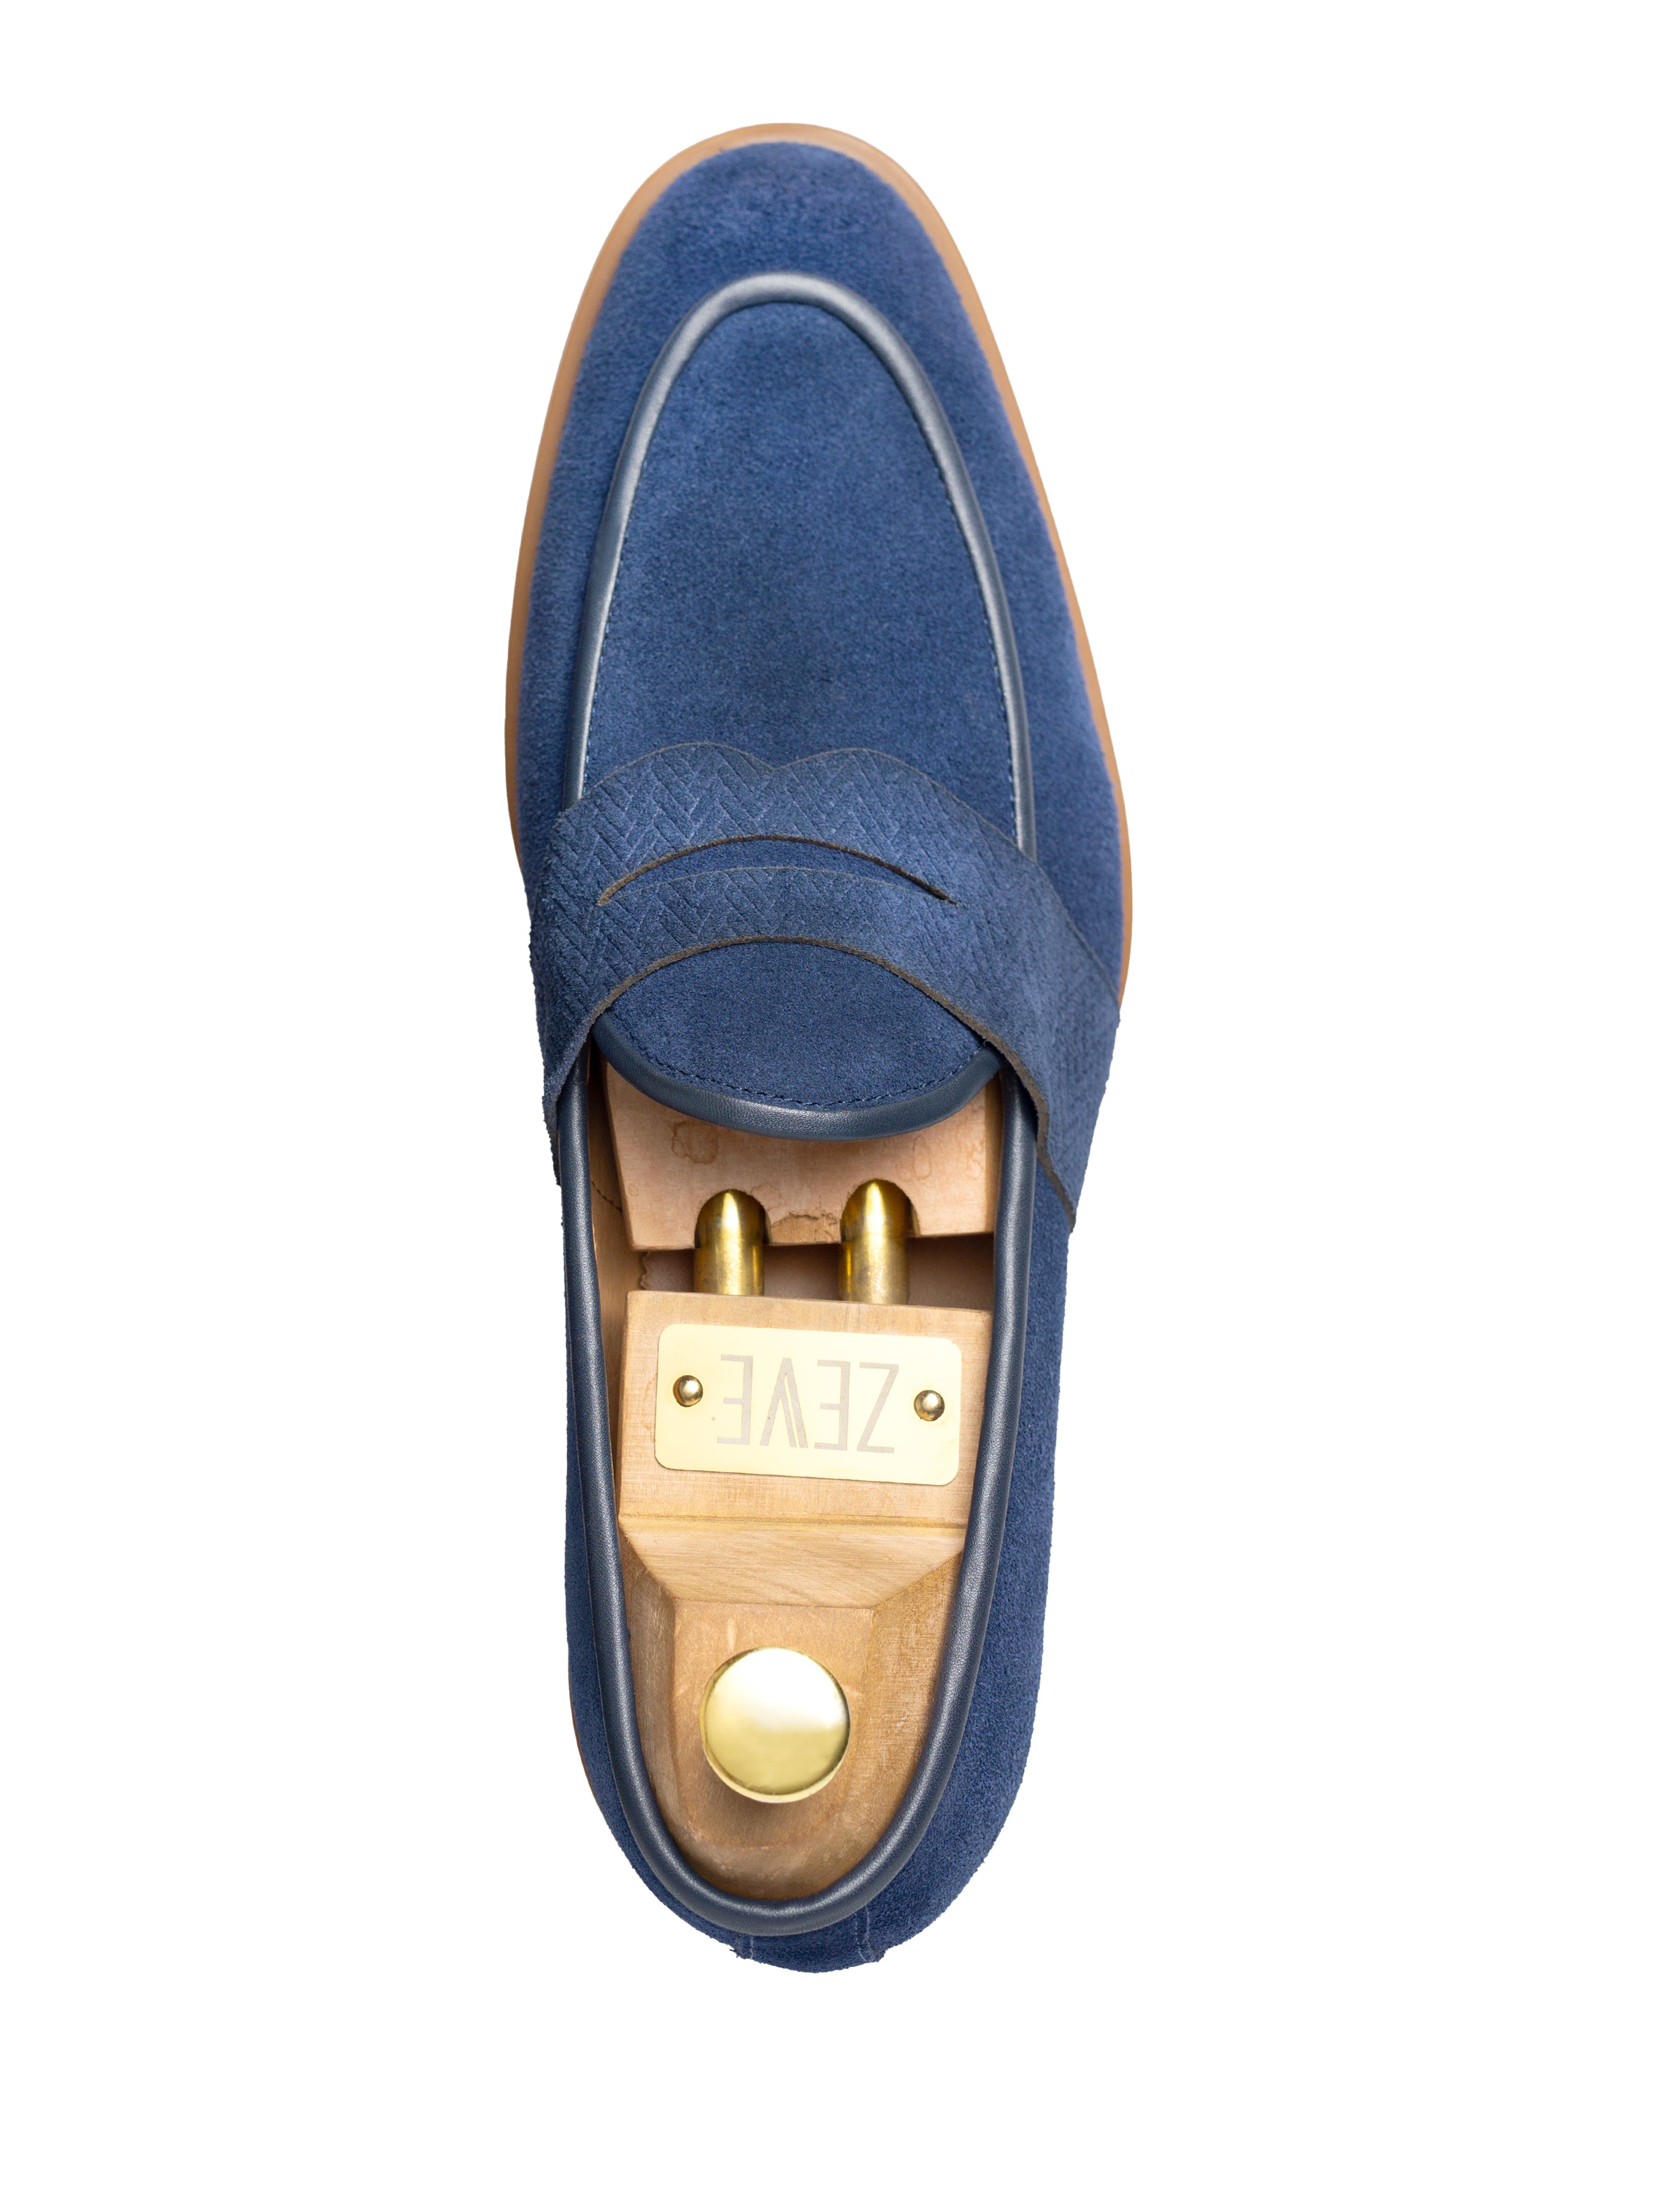 Belgian Loafer Penny - Navy Suede Leather (Soflex Sole) - Zeve Shoes